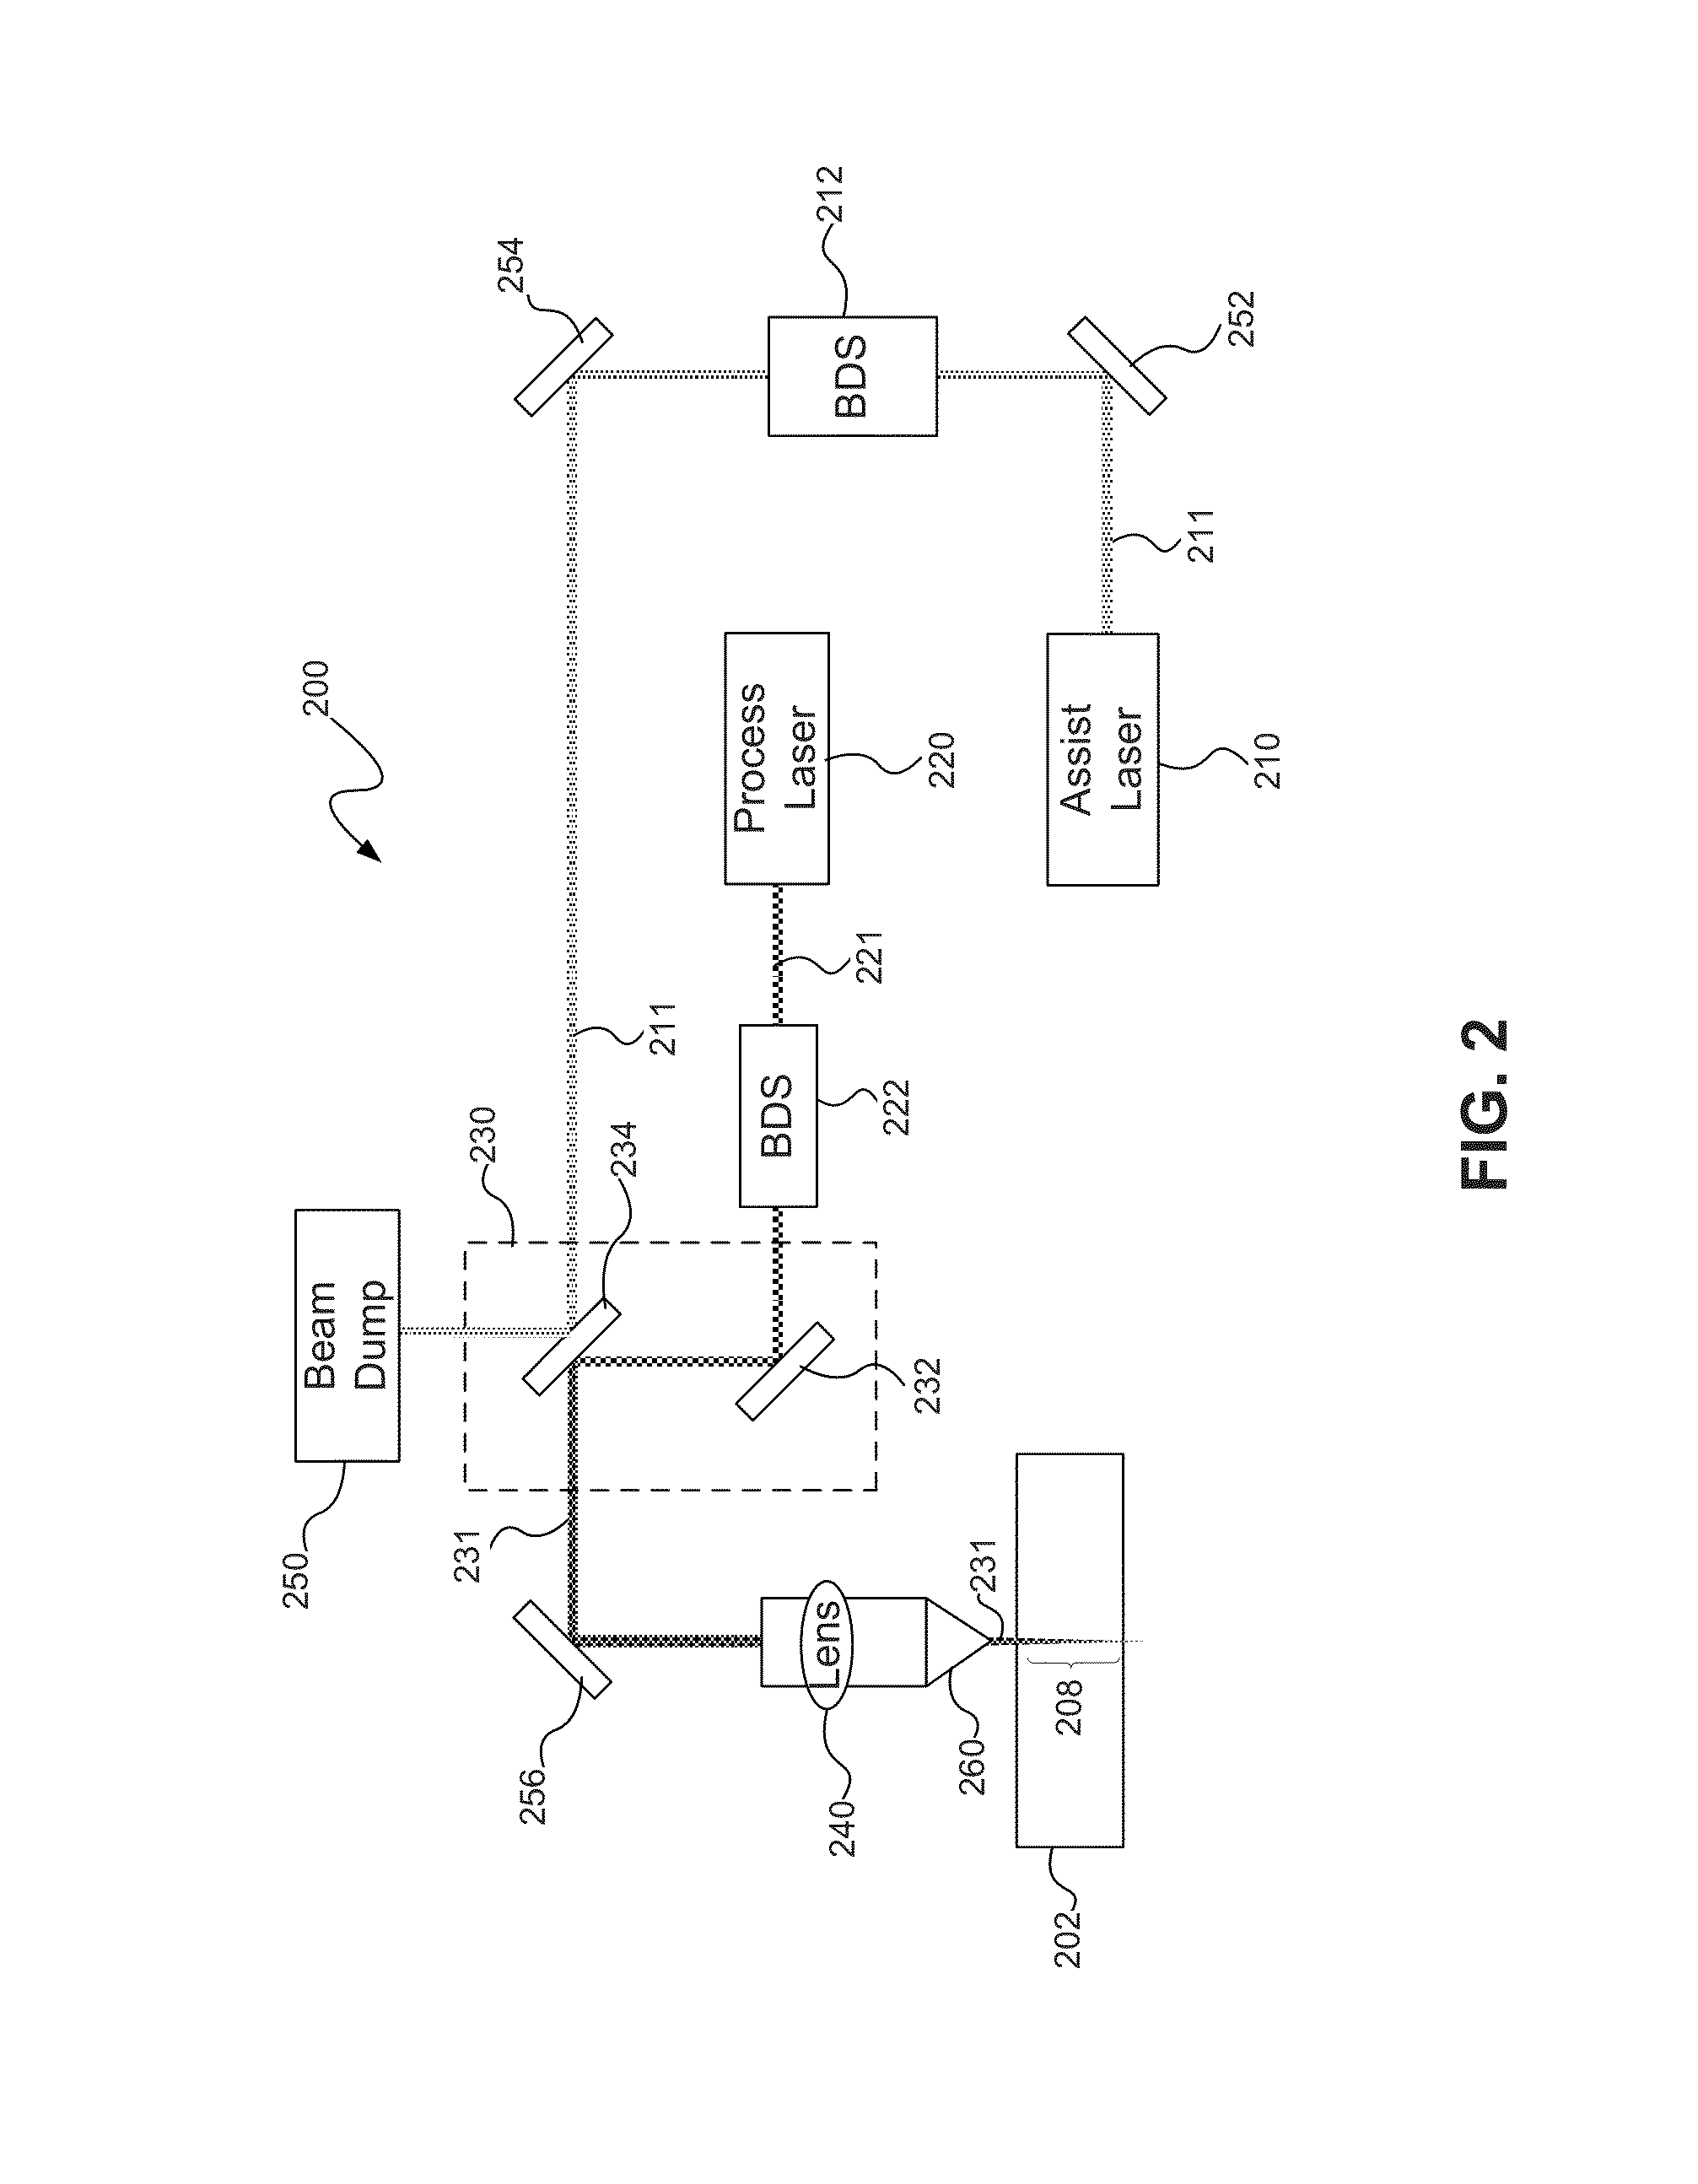 System and method for laser beveling and/or polishing